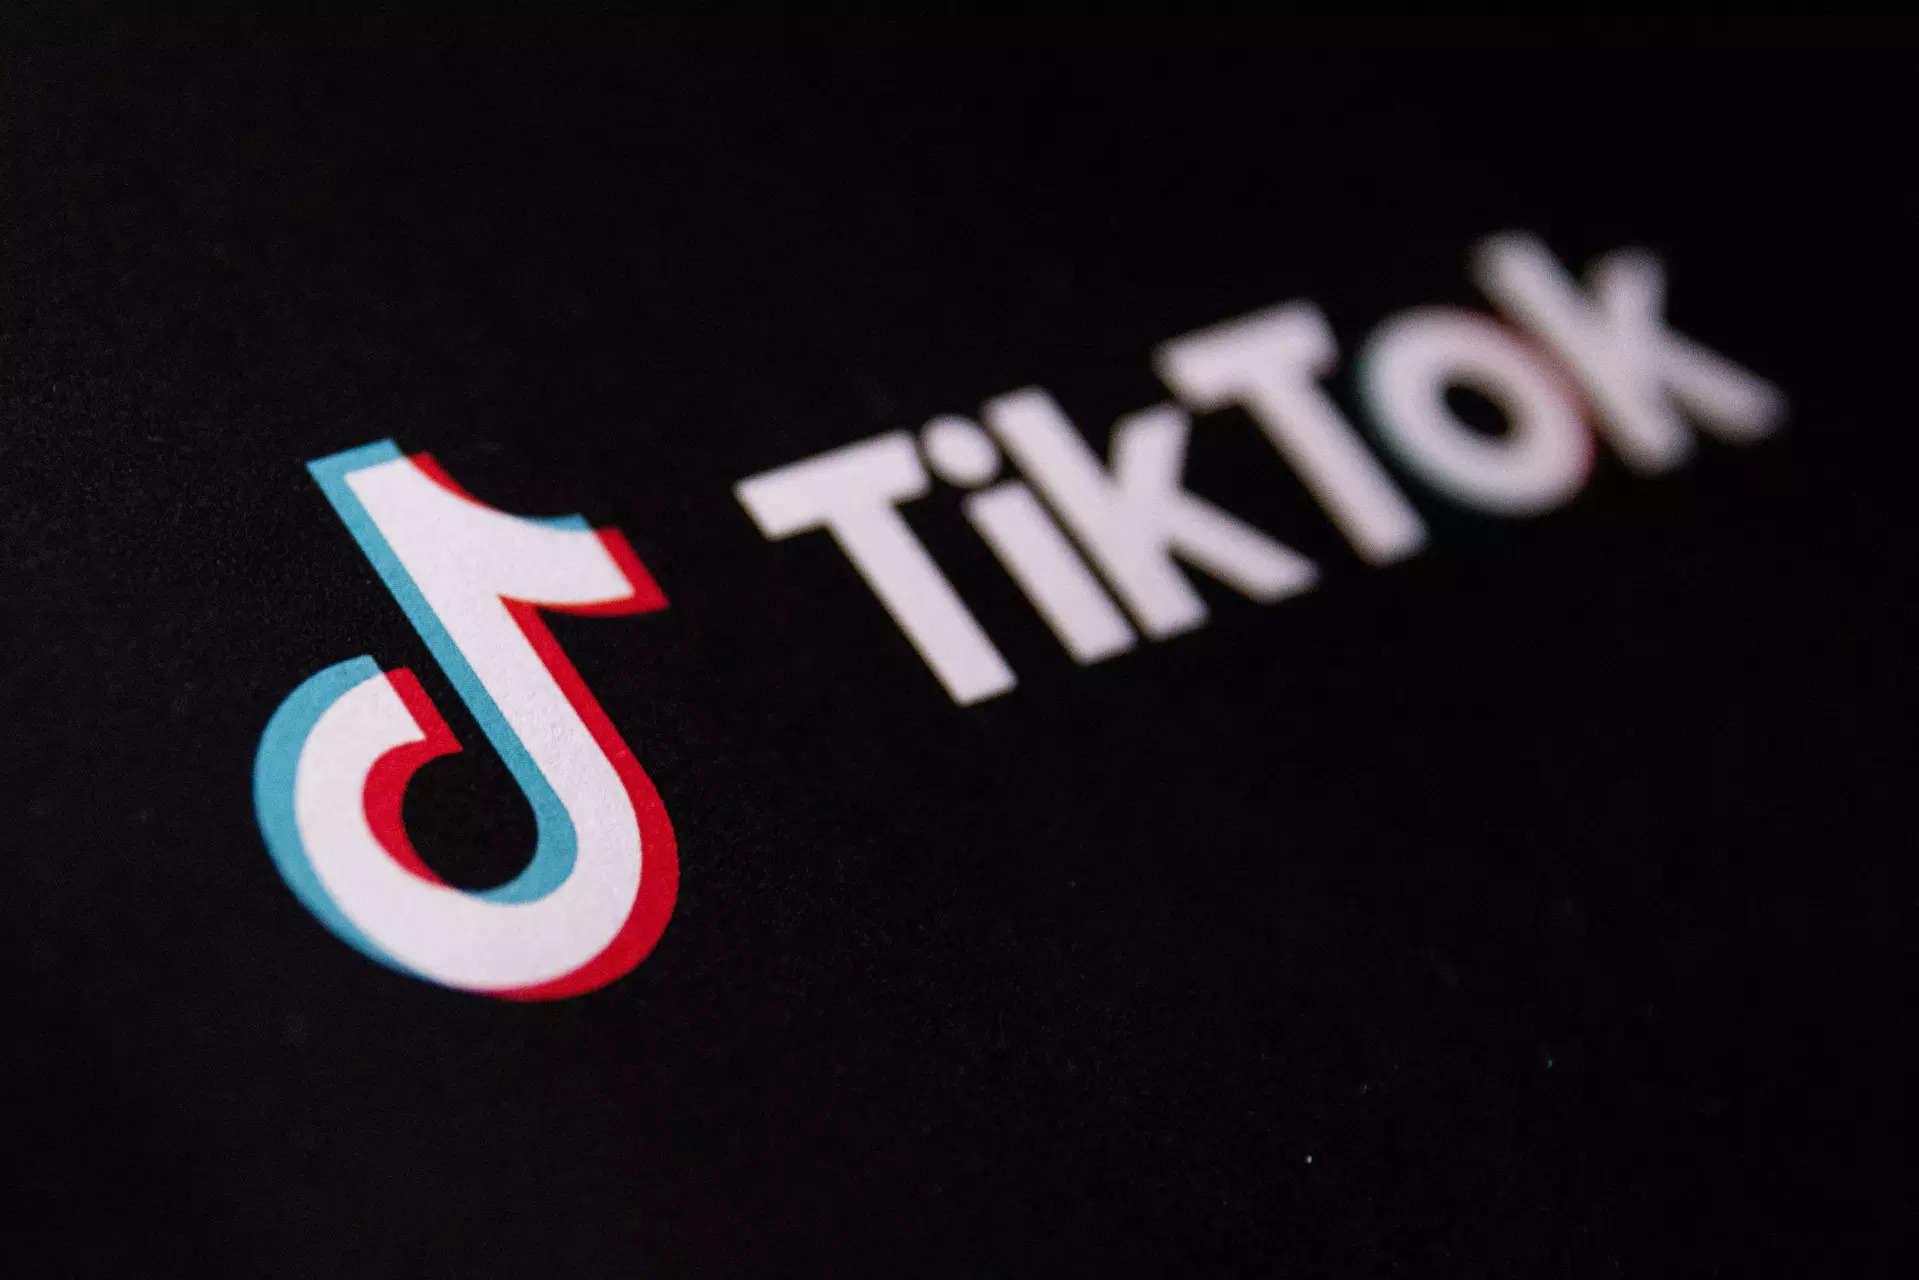 A New Sign Of Commerce: As Seen On TikTok